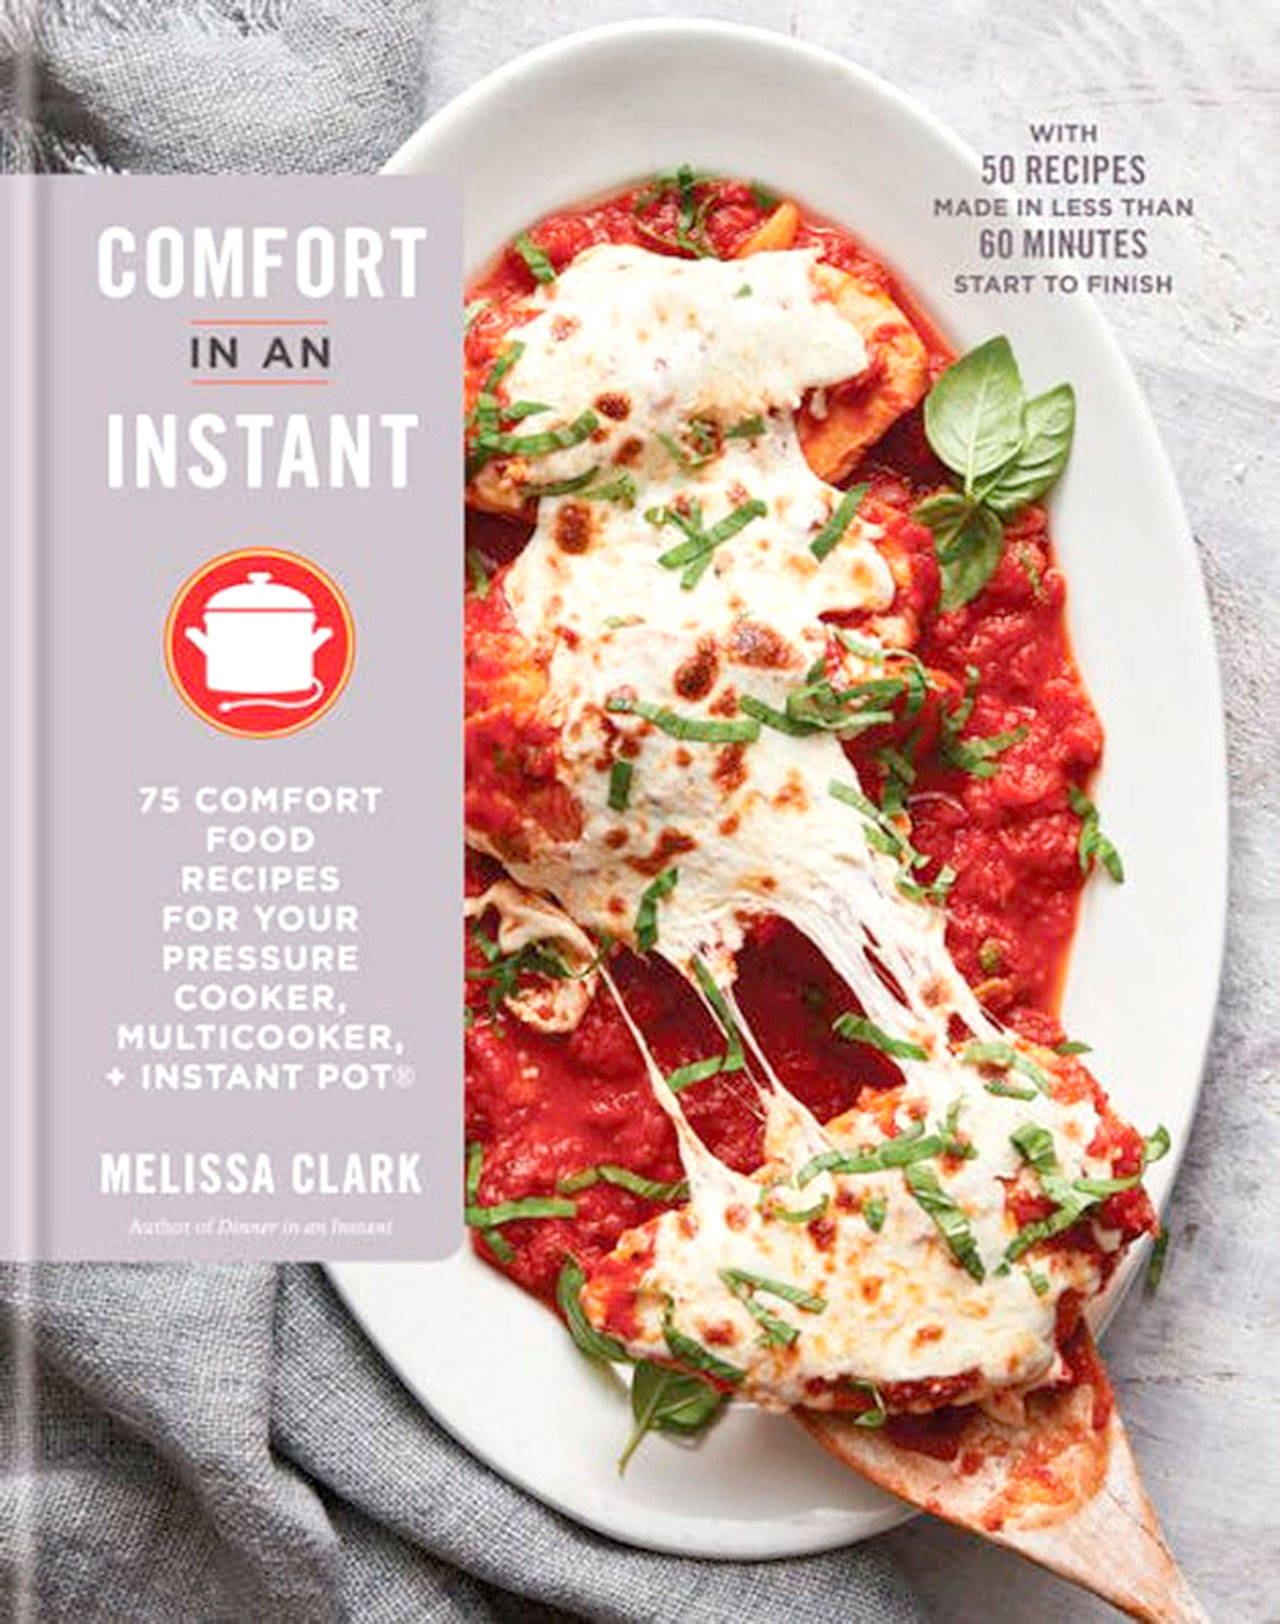 Need Instant Pot ideas? There are lots of new cookbooks to help